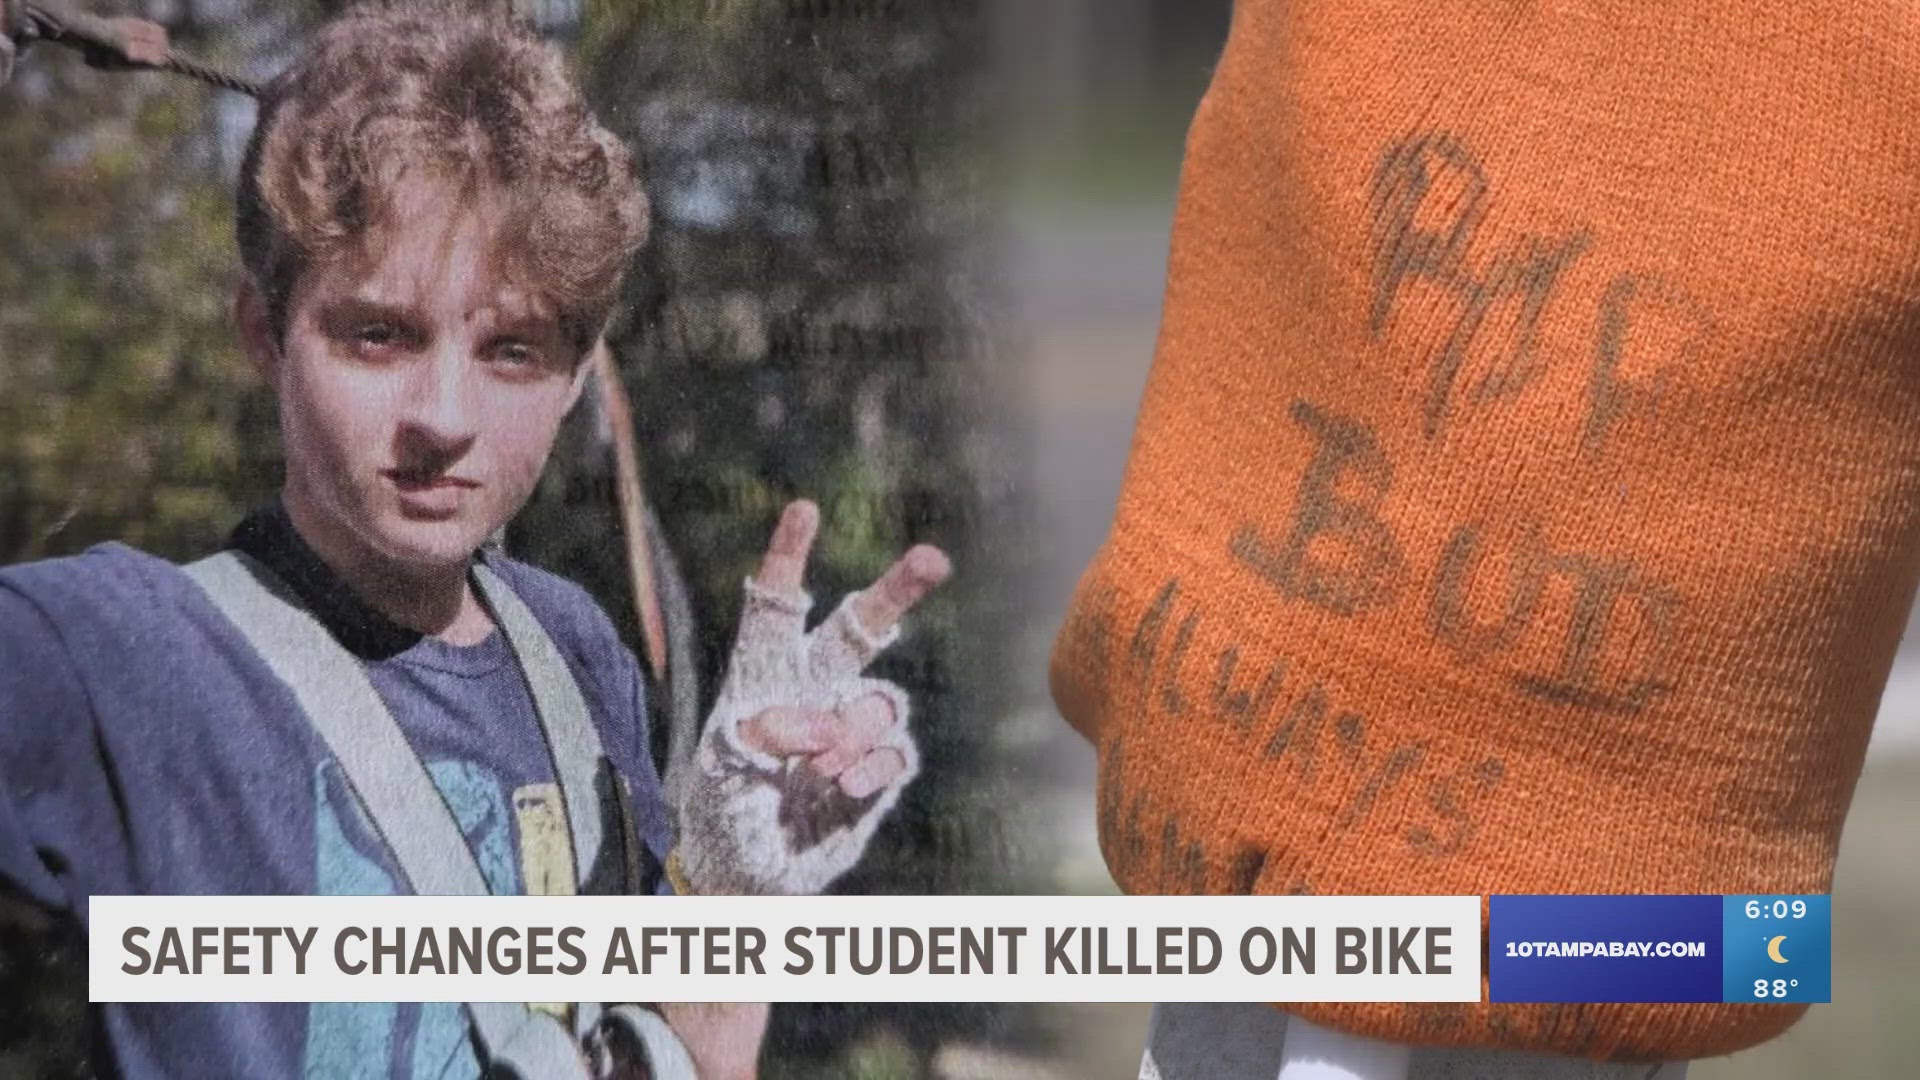 Myles Farago was hit and killed while bicycling to school in Hudson. 10 Investigates looked into what safety changes have been made to the dark, unlit roadway.